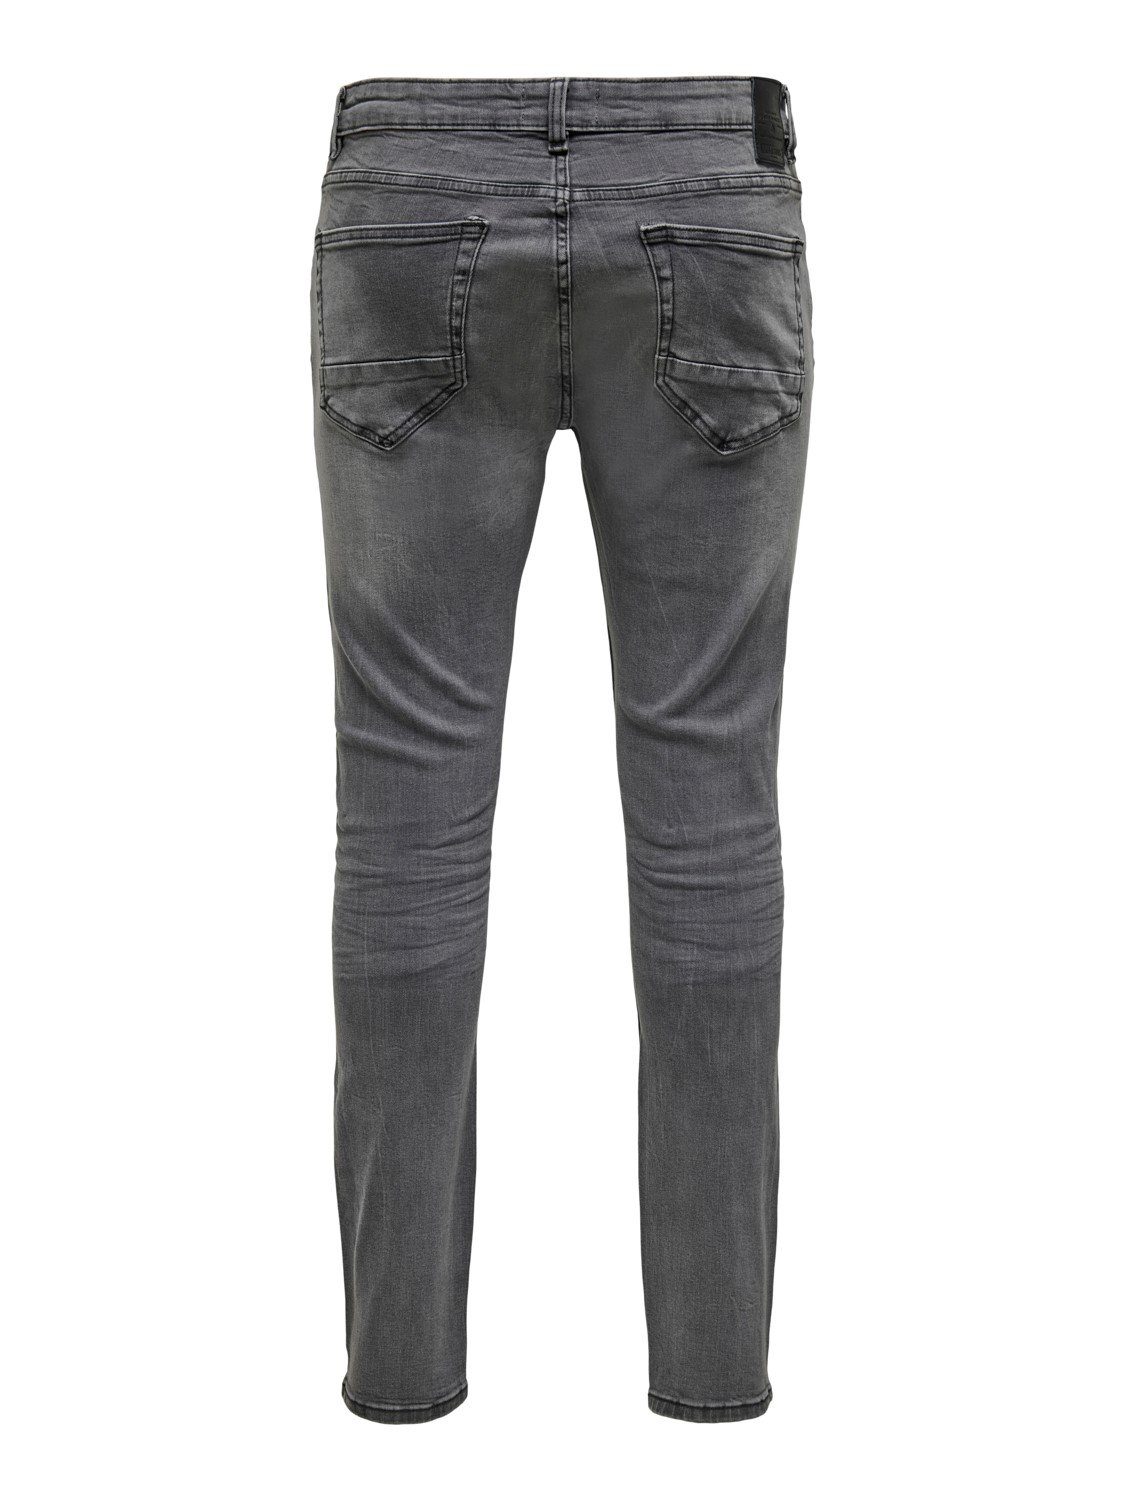 in (1-tlg) Jeans Grau Slim-fit-Jeans Washed SONS Pants ONLY Basic Denim Stoned Fit Skinny & ONSWARP 3977 Hose